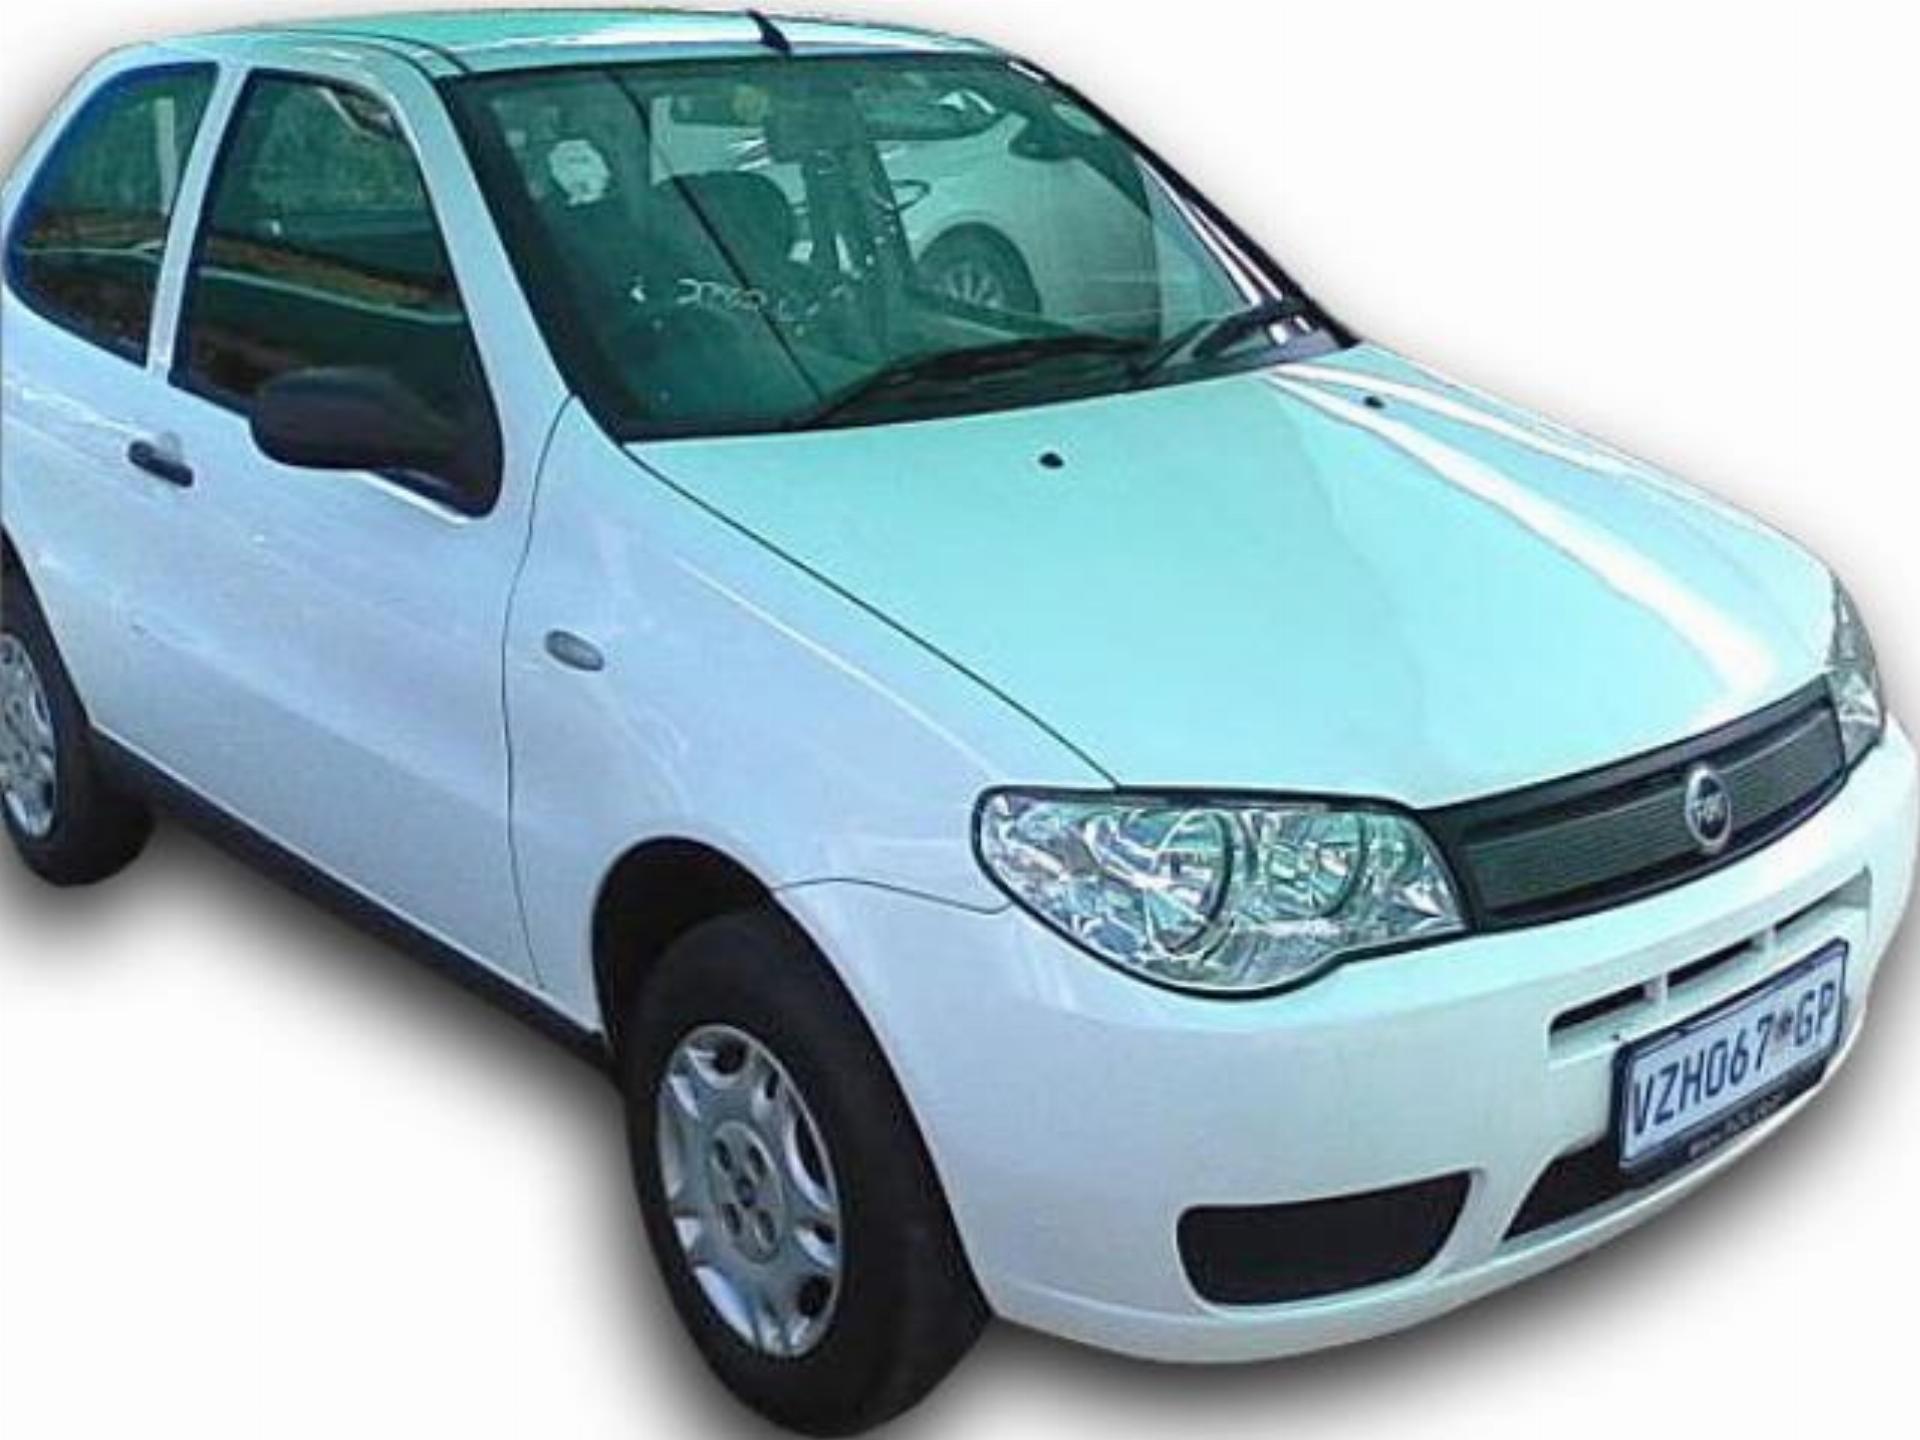 Used Fiat Palio II GO 1.2 3 DR 2007 on auction PV1016299